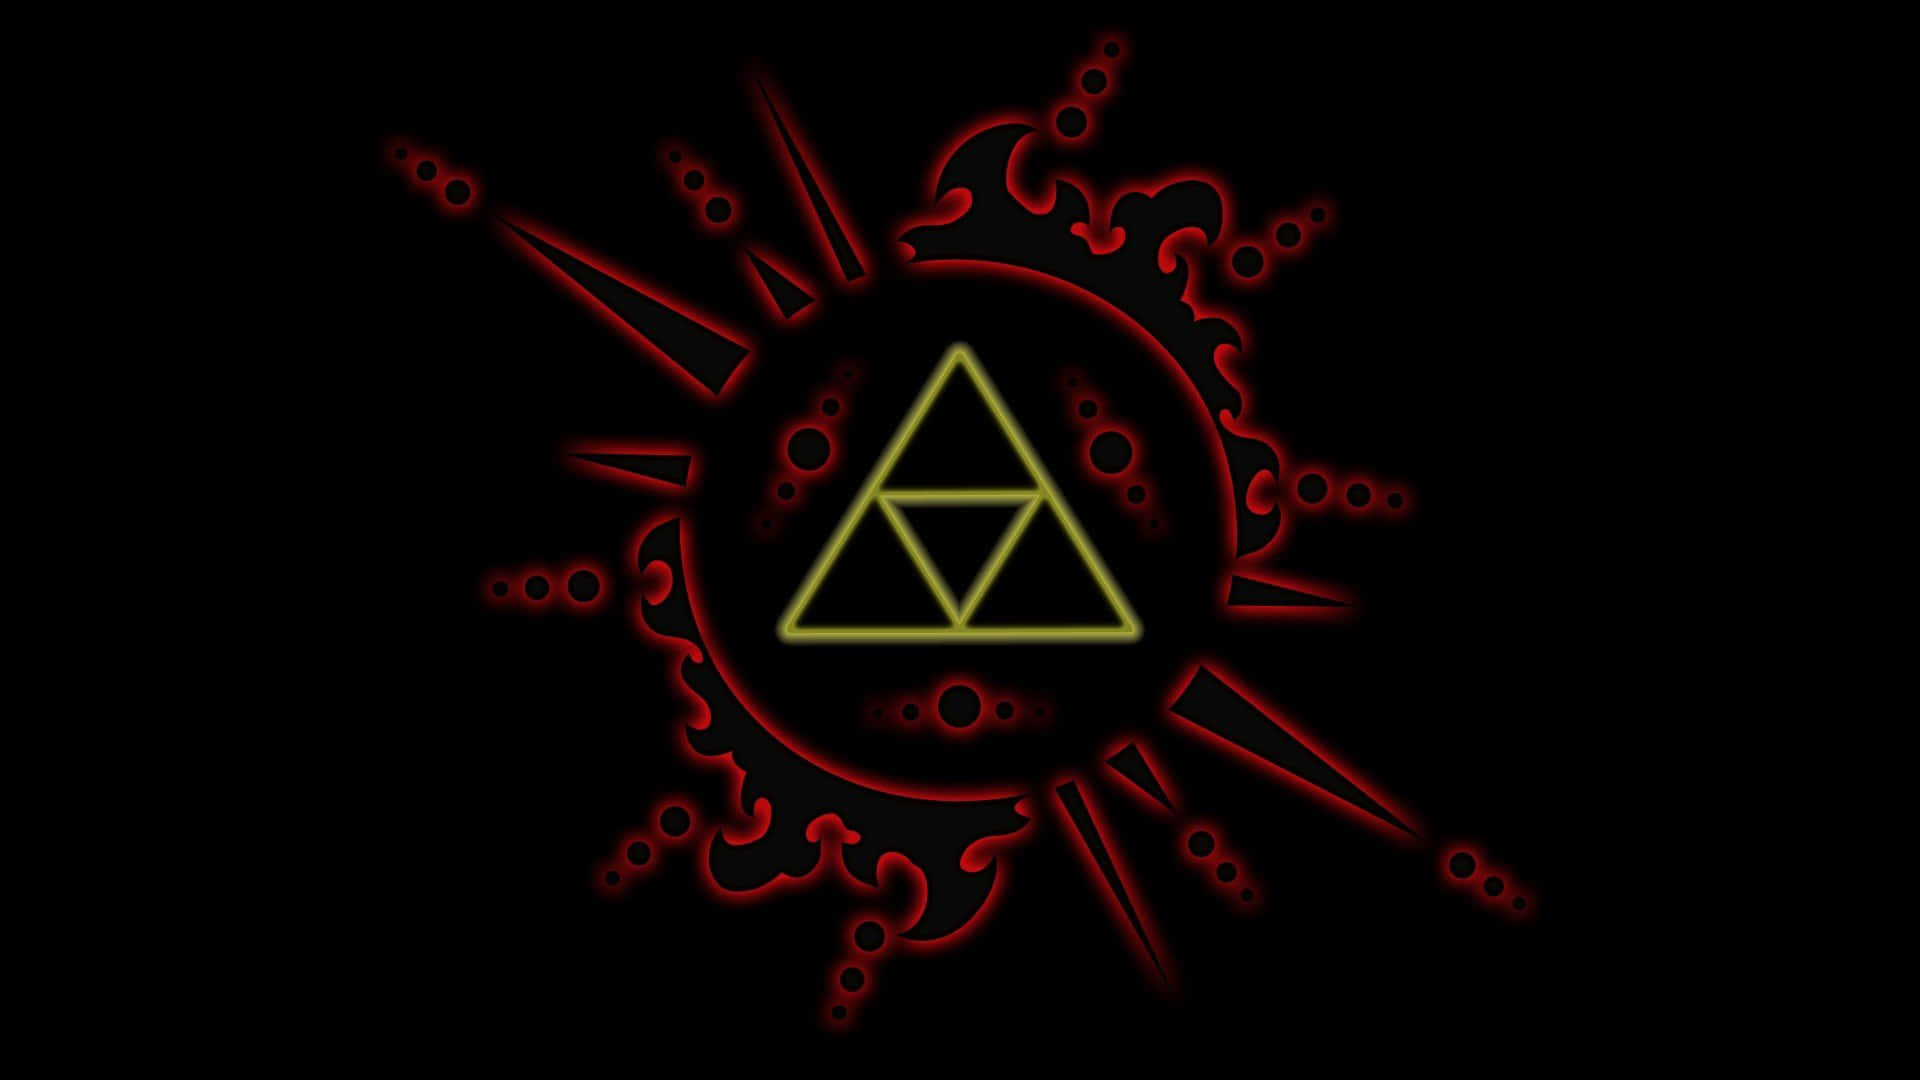 All-power Lies Within The Triforce